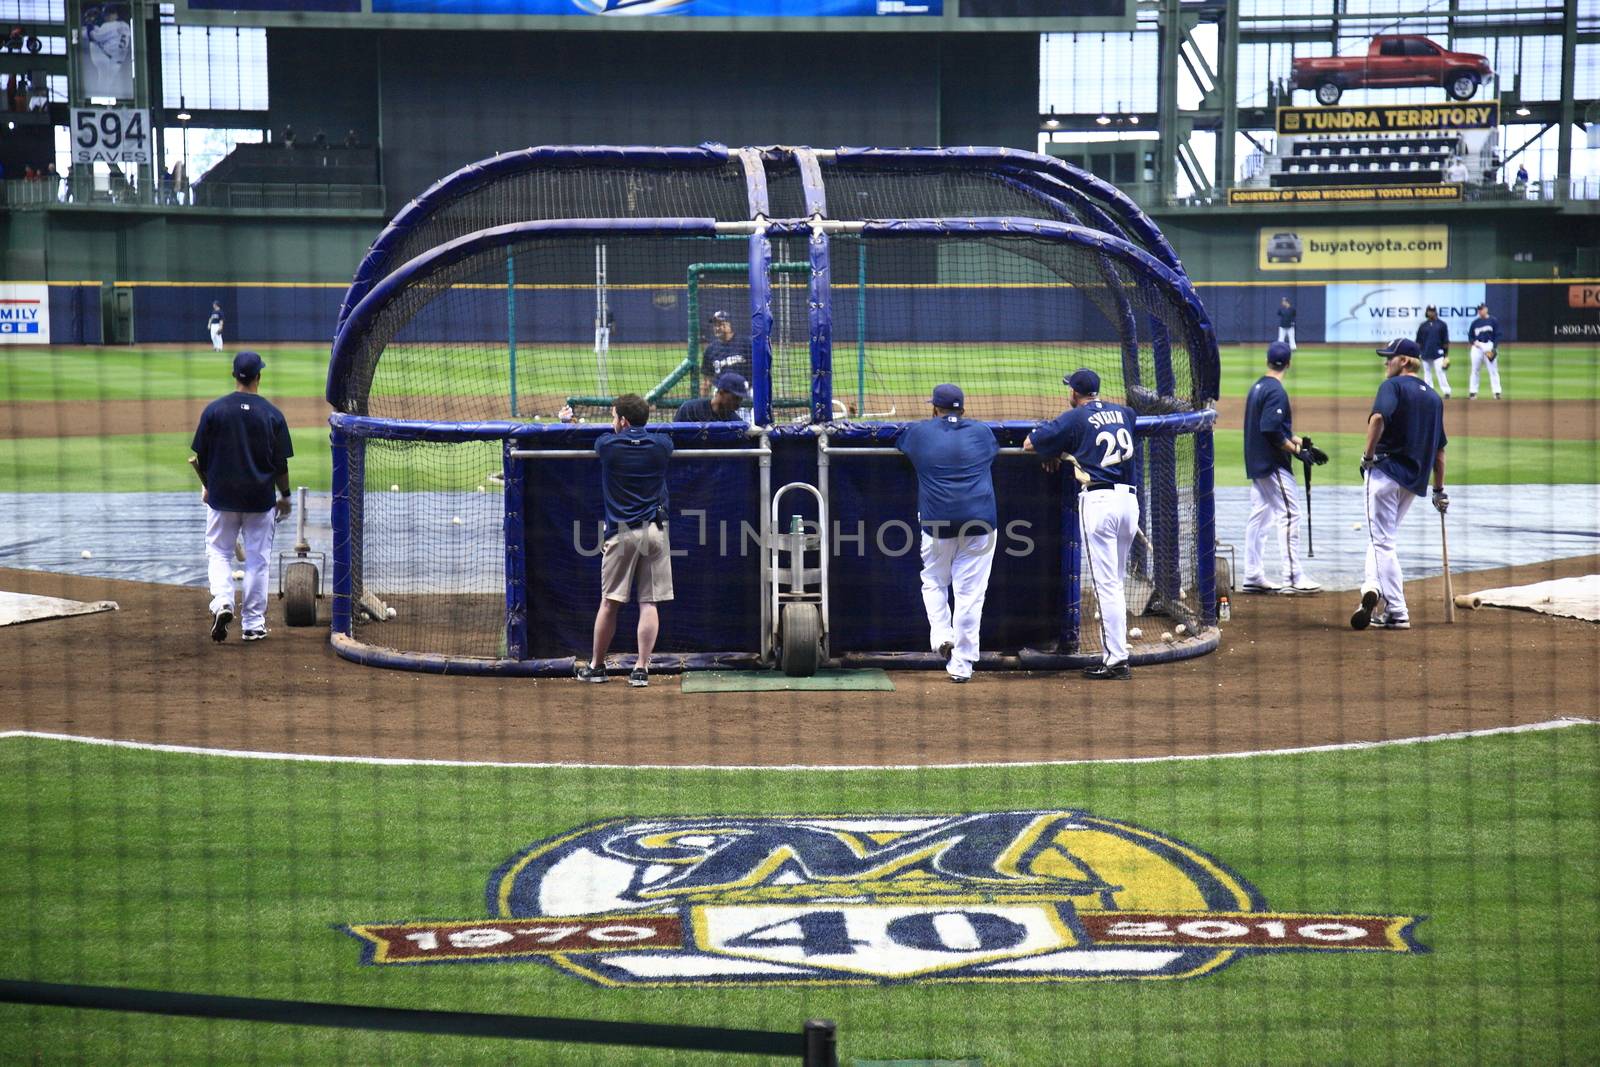 Batting practice at Miller Park before a Brewers game against the Chicago Cubs.